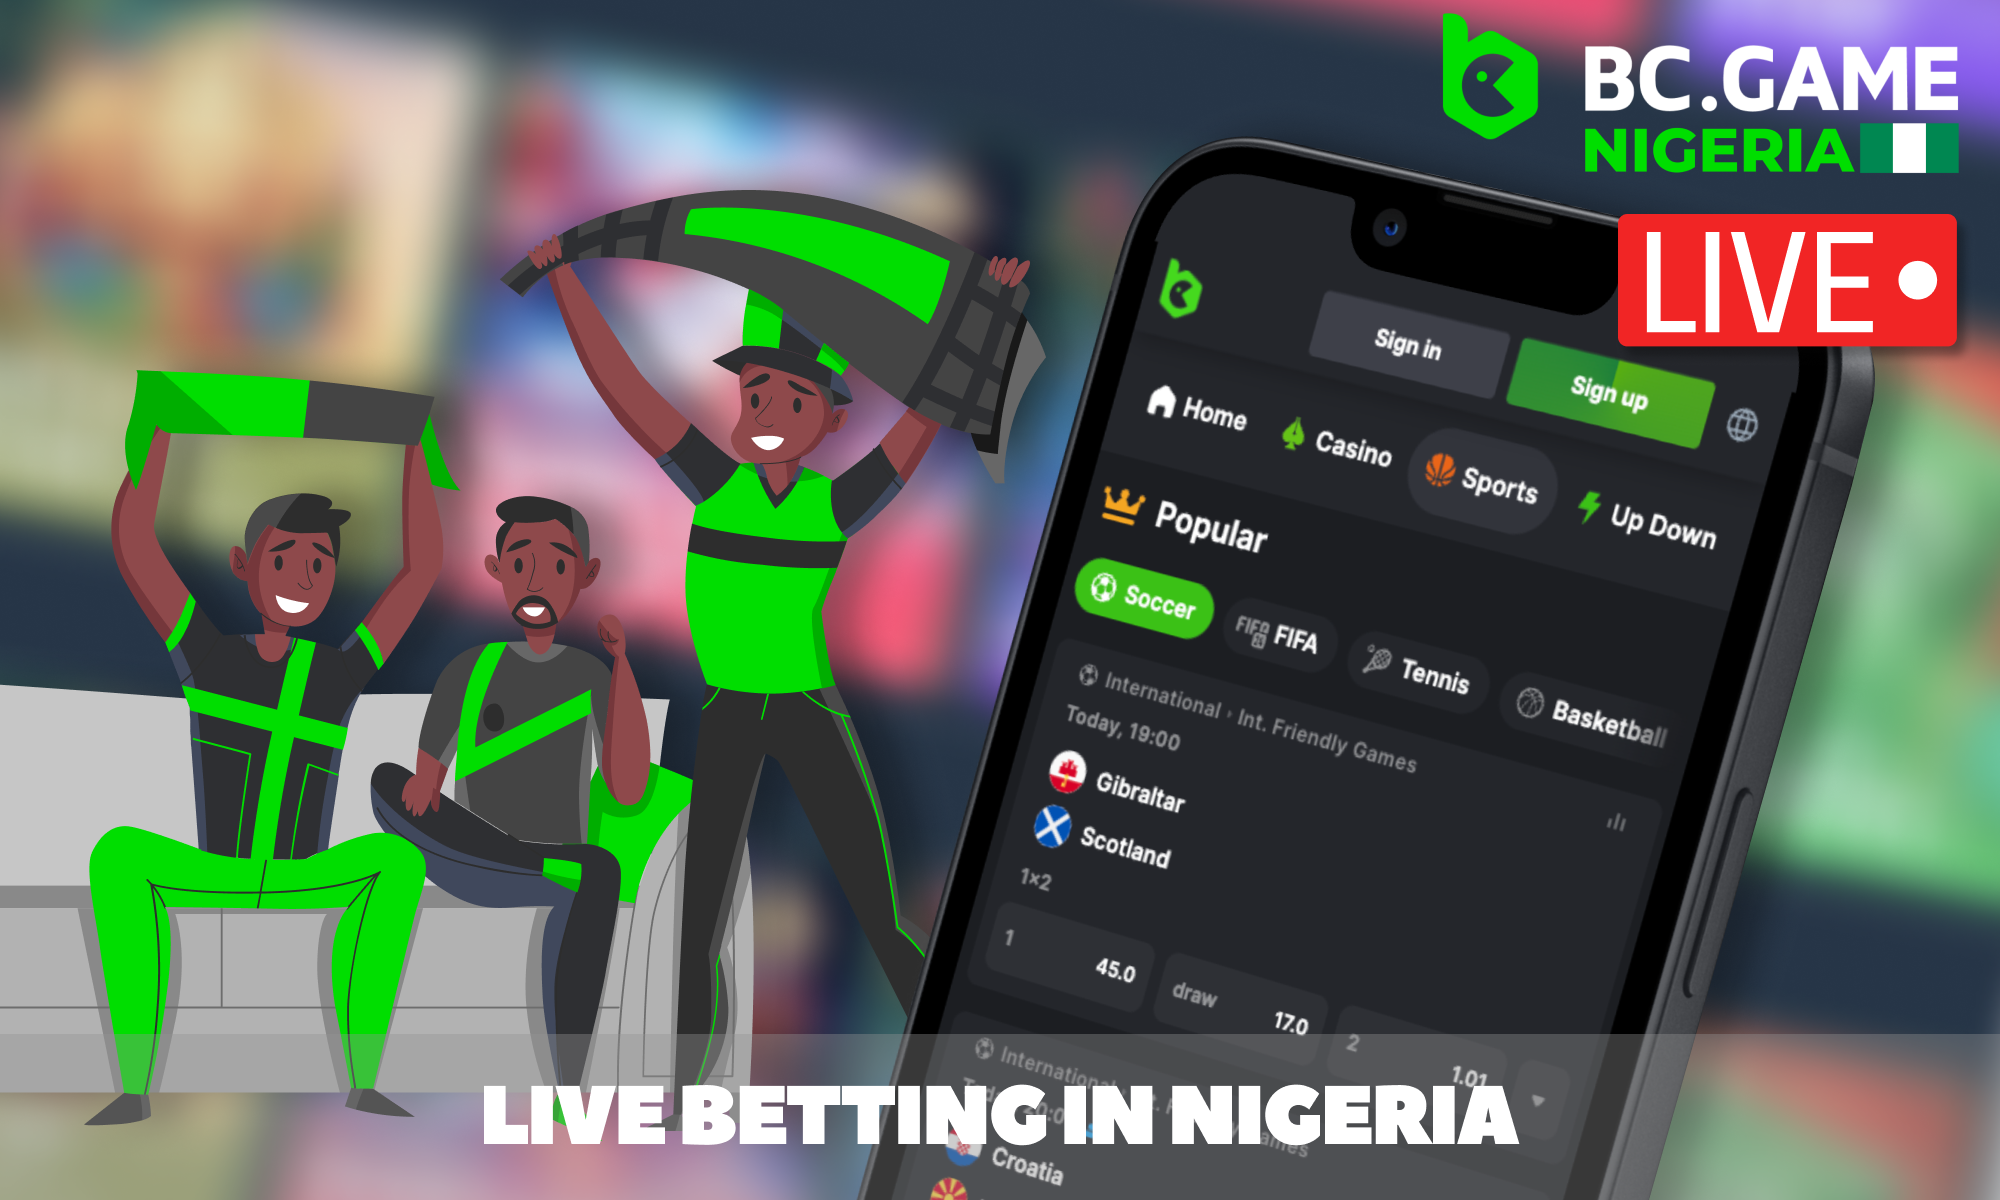 Live betting in Nigeria at the BC Game